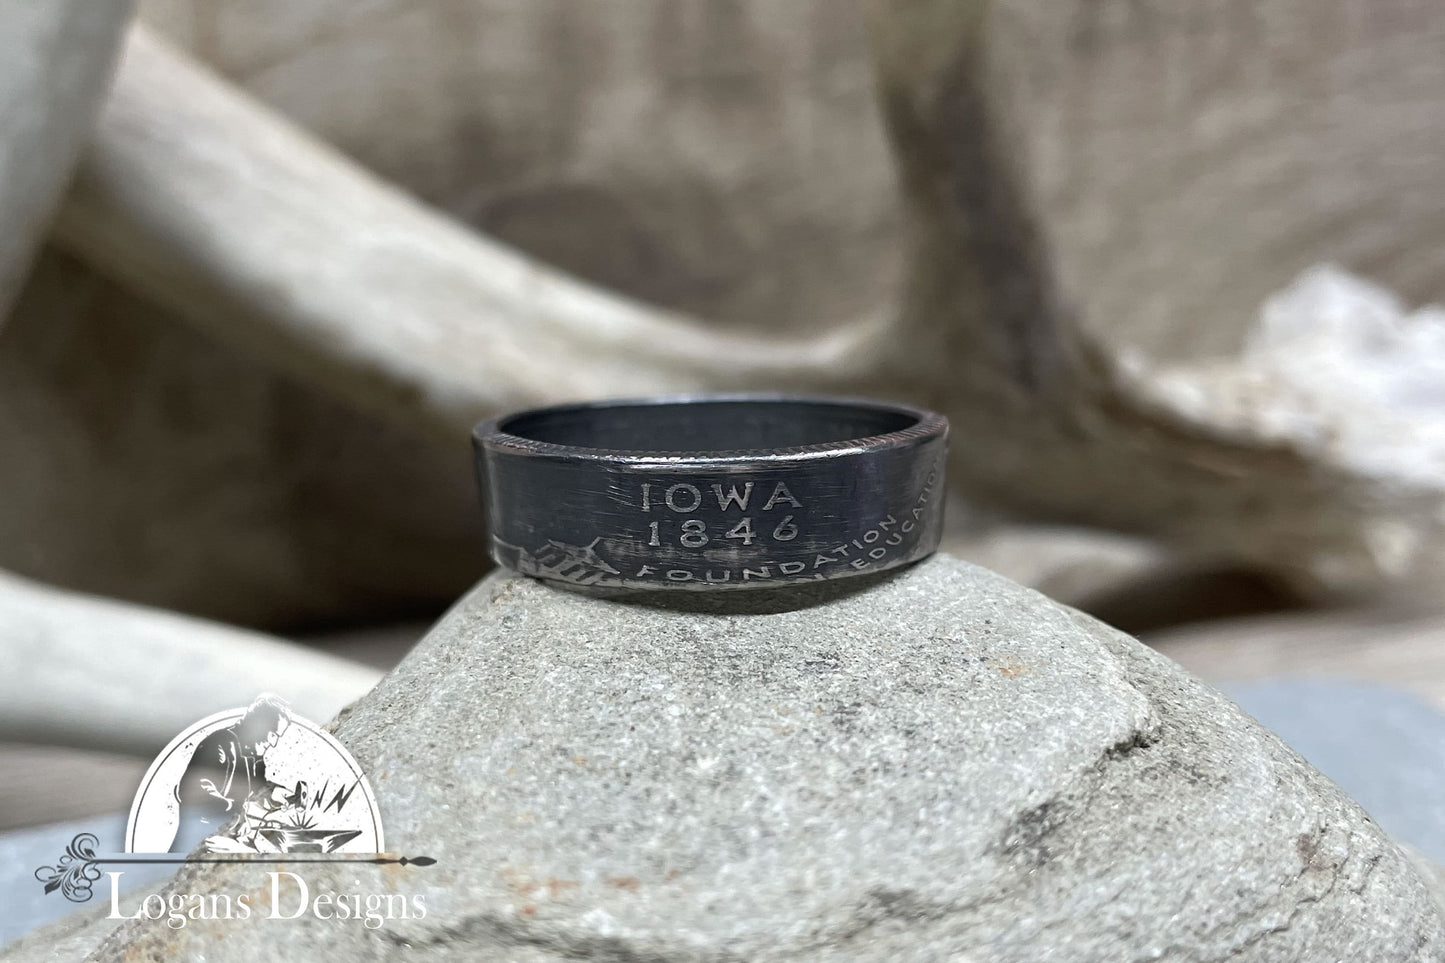 Iowa US State Quarter Coin Ring